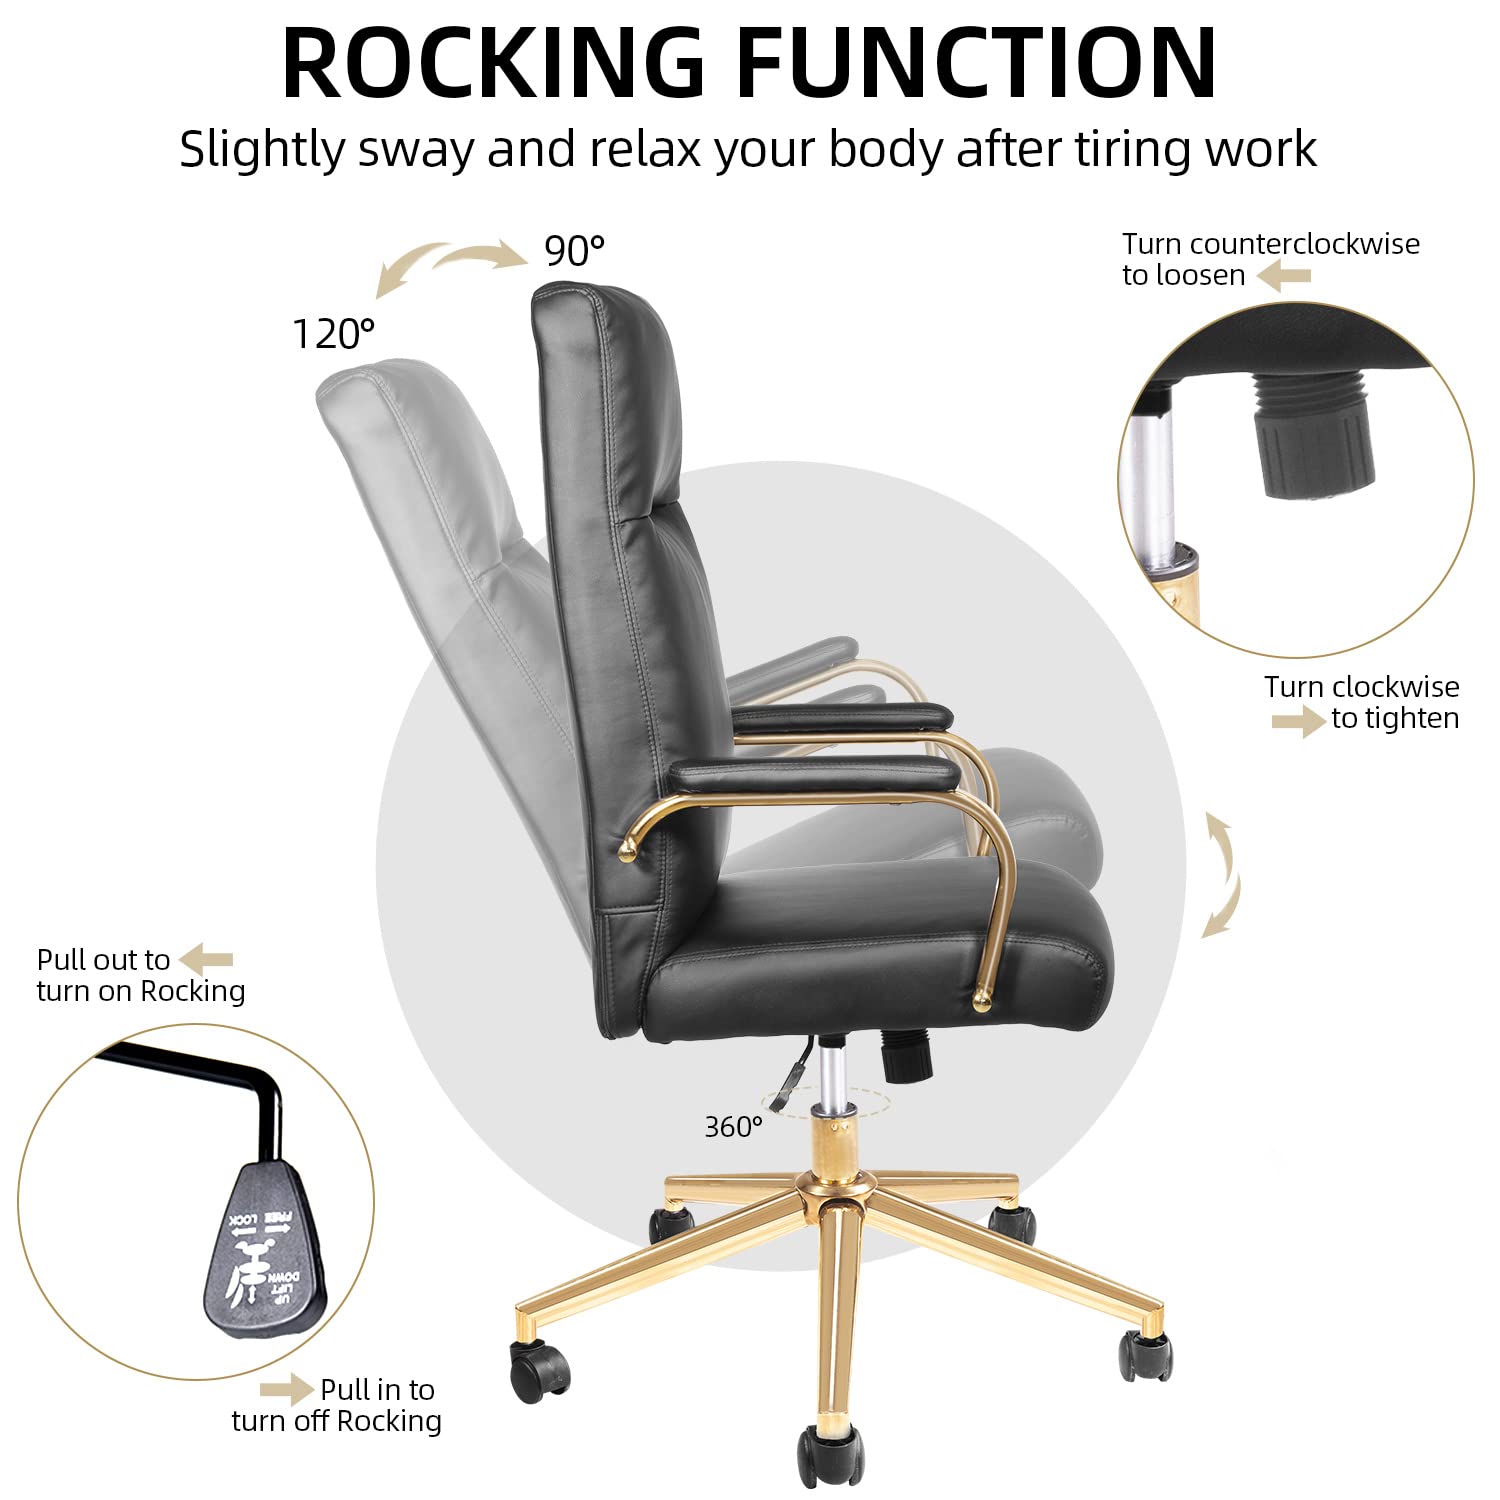 Toszn Comfy Desk Chairs White and Gold,High Back Leather Office Chair with Back Support and Armrest, Ergonomic Compuer Chairs with Wheels and Gold Legs,White